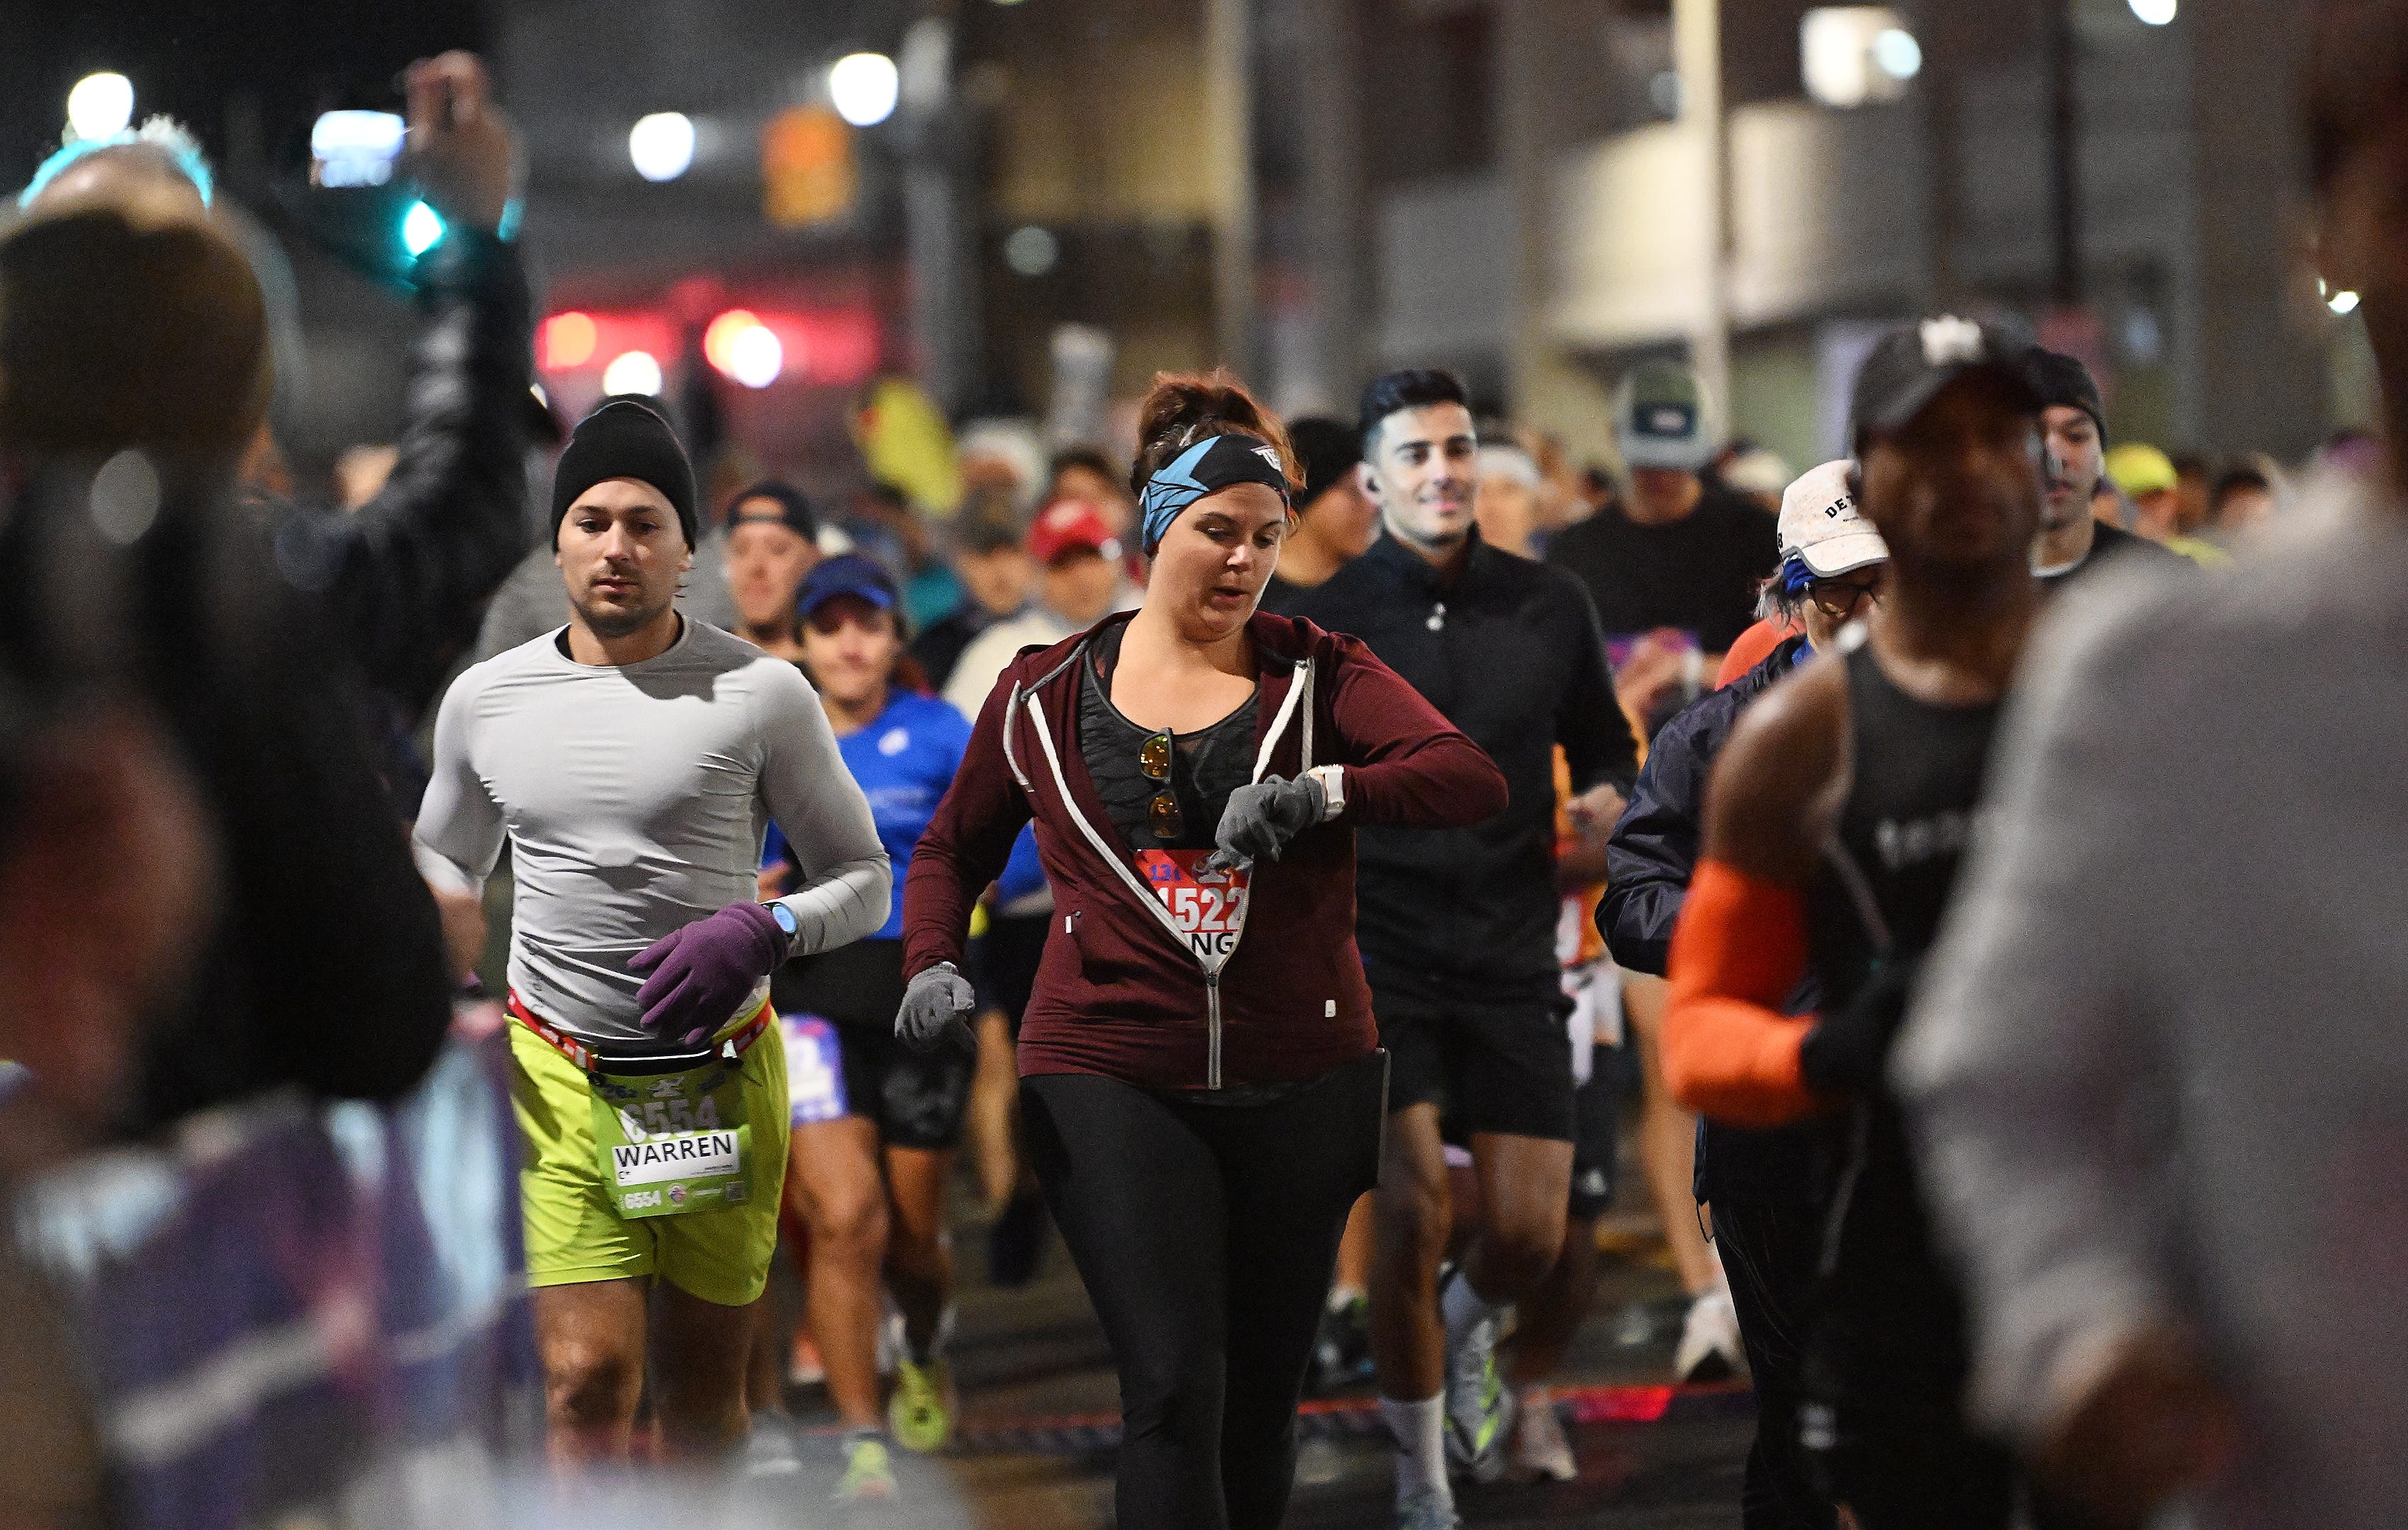 Some runners in the second wave check their times at the start of the Detroit Free Press Marathon on Fort Street in Detroit on Oct. 15, 2023.